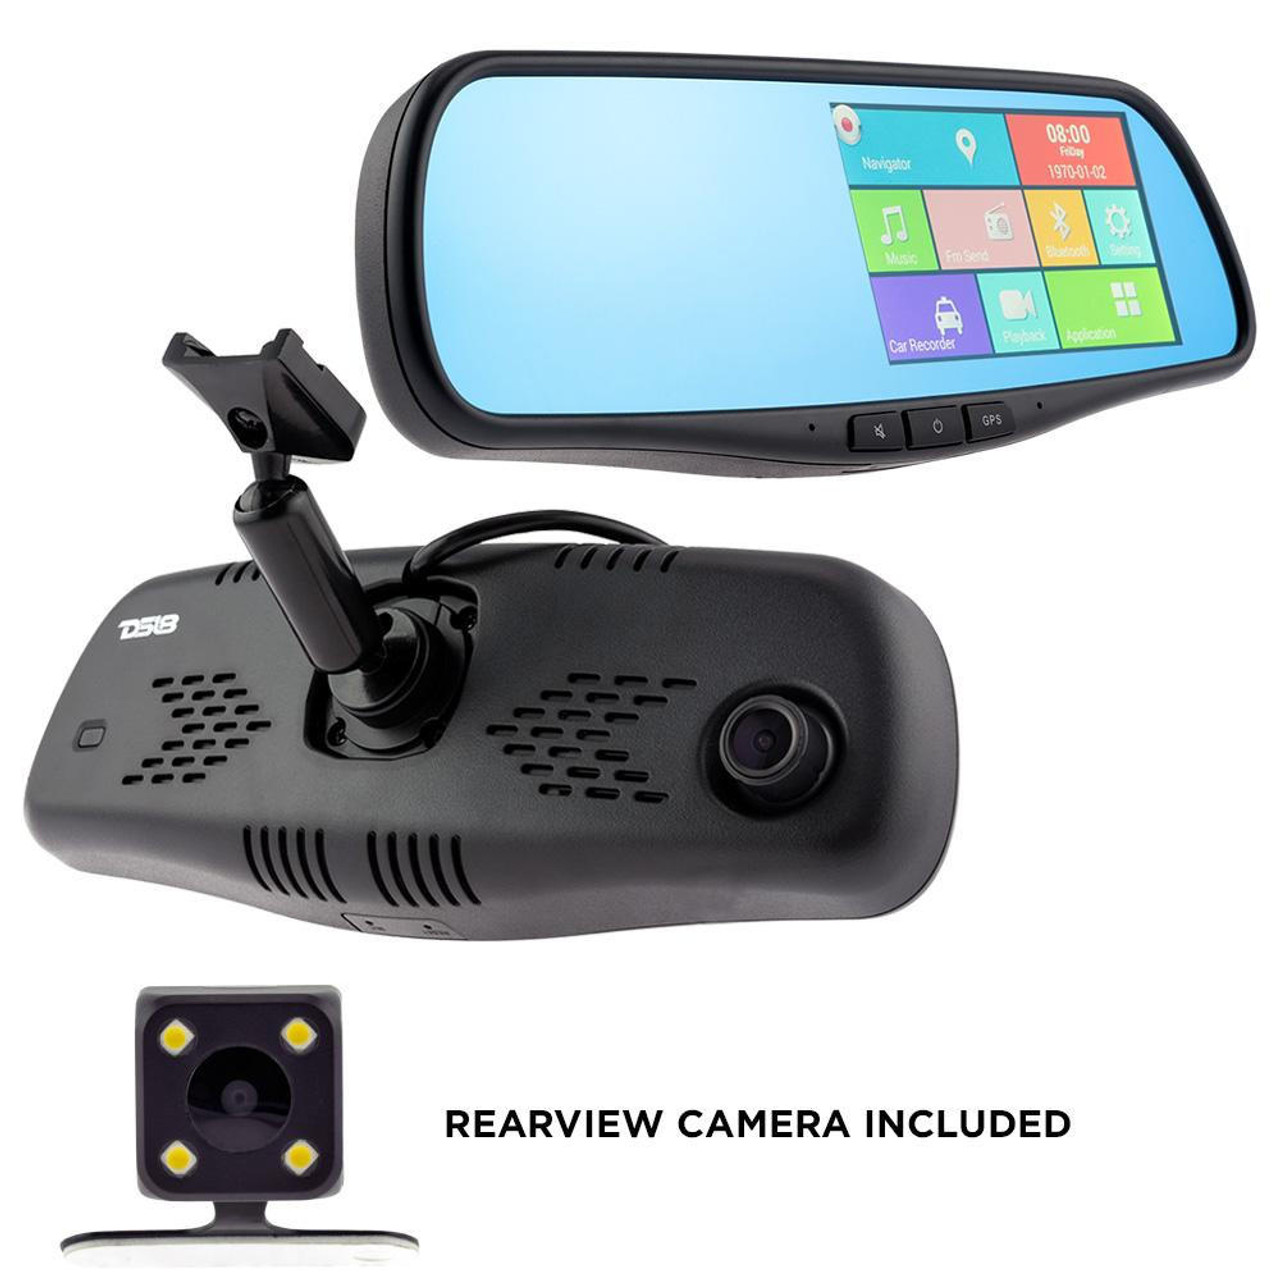 https://cdn11.bigcommerce.com/s-209k8v1/images/stencil/1280x1280/products/19140/41426/ds18-audio-rearview-smart-mirror-with-4.3-hd-lcd-touch-screen-with-android-1080p-dash-cam-recorder-special-mount__14610.1658939924.jpg?c=2